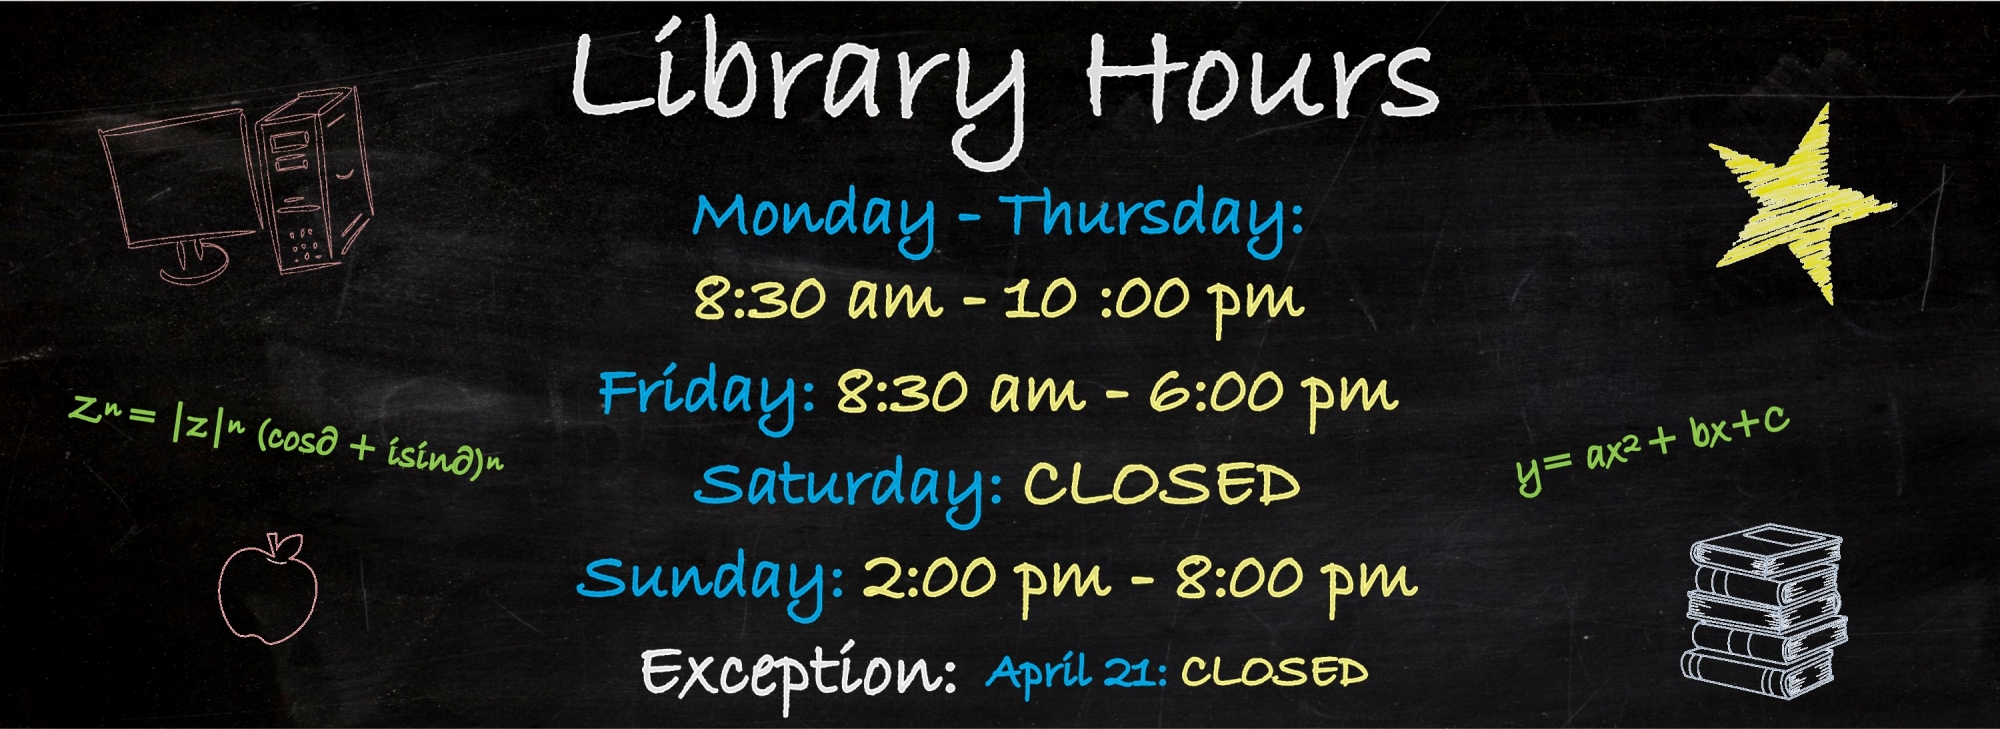  LIB_Amended_Spring2019_Hours